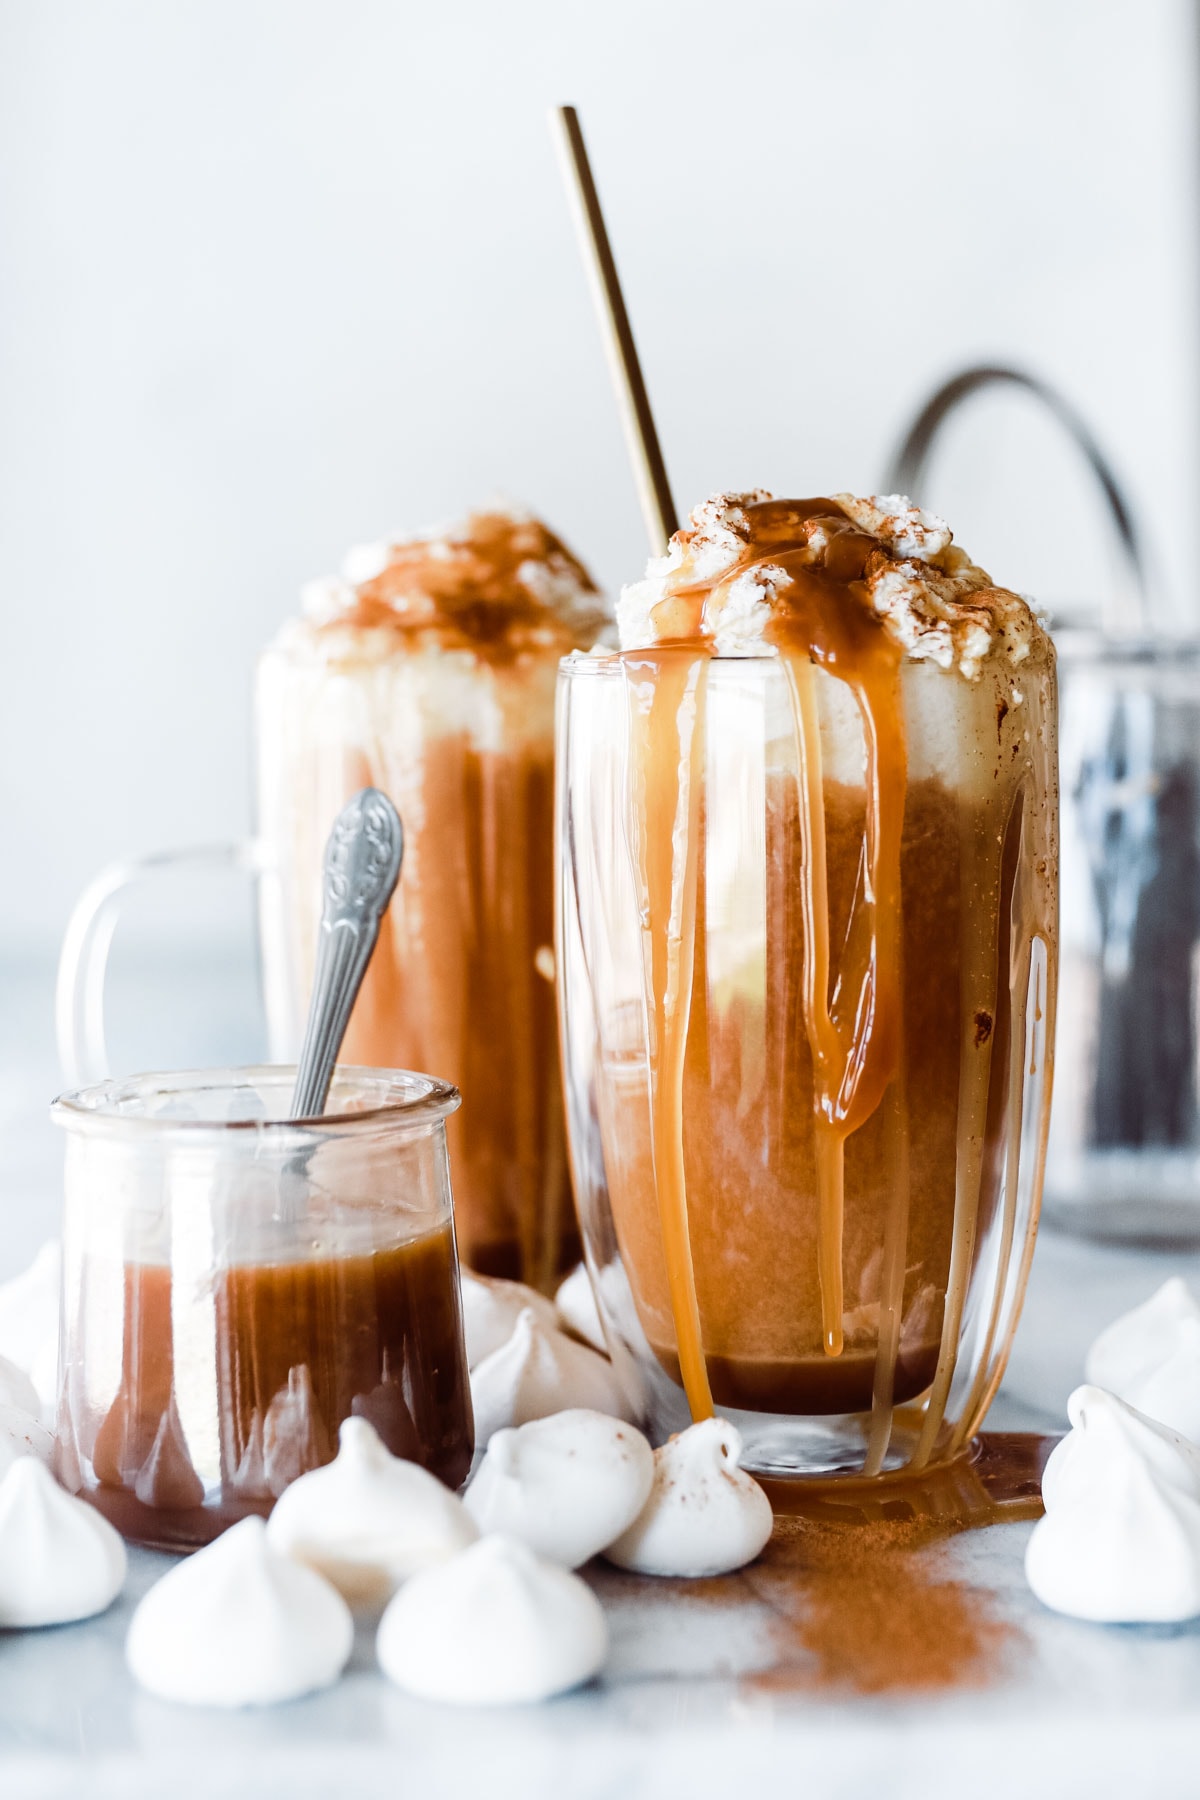 glass mug with caramel colored drink and whip cream and caramel dripping on it